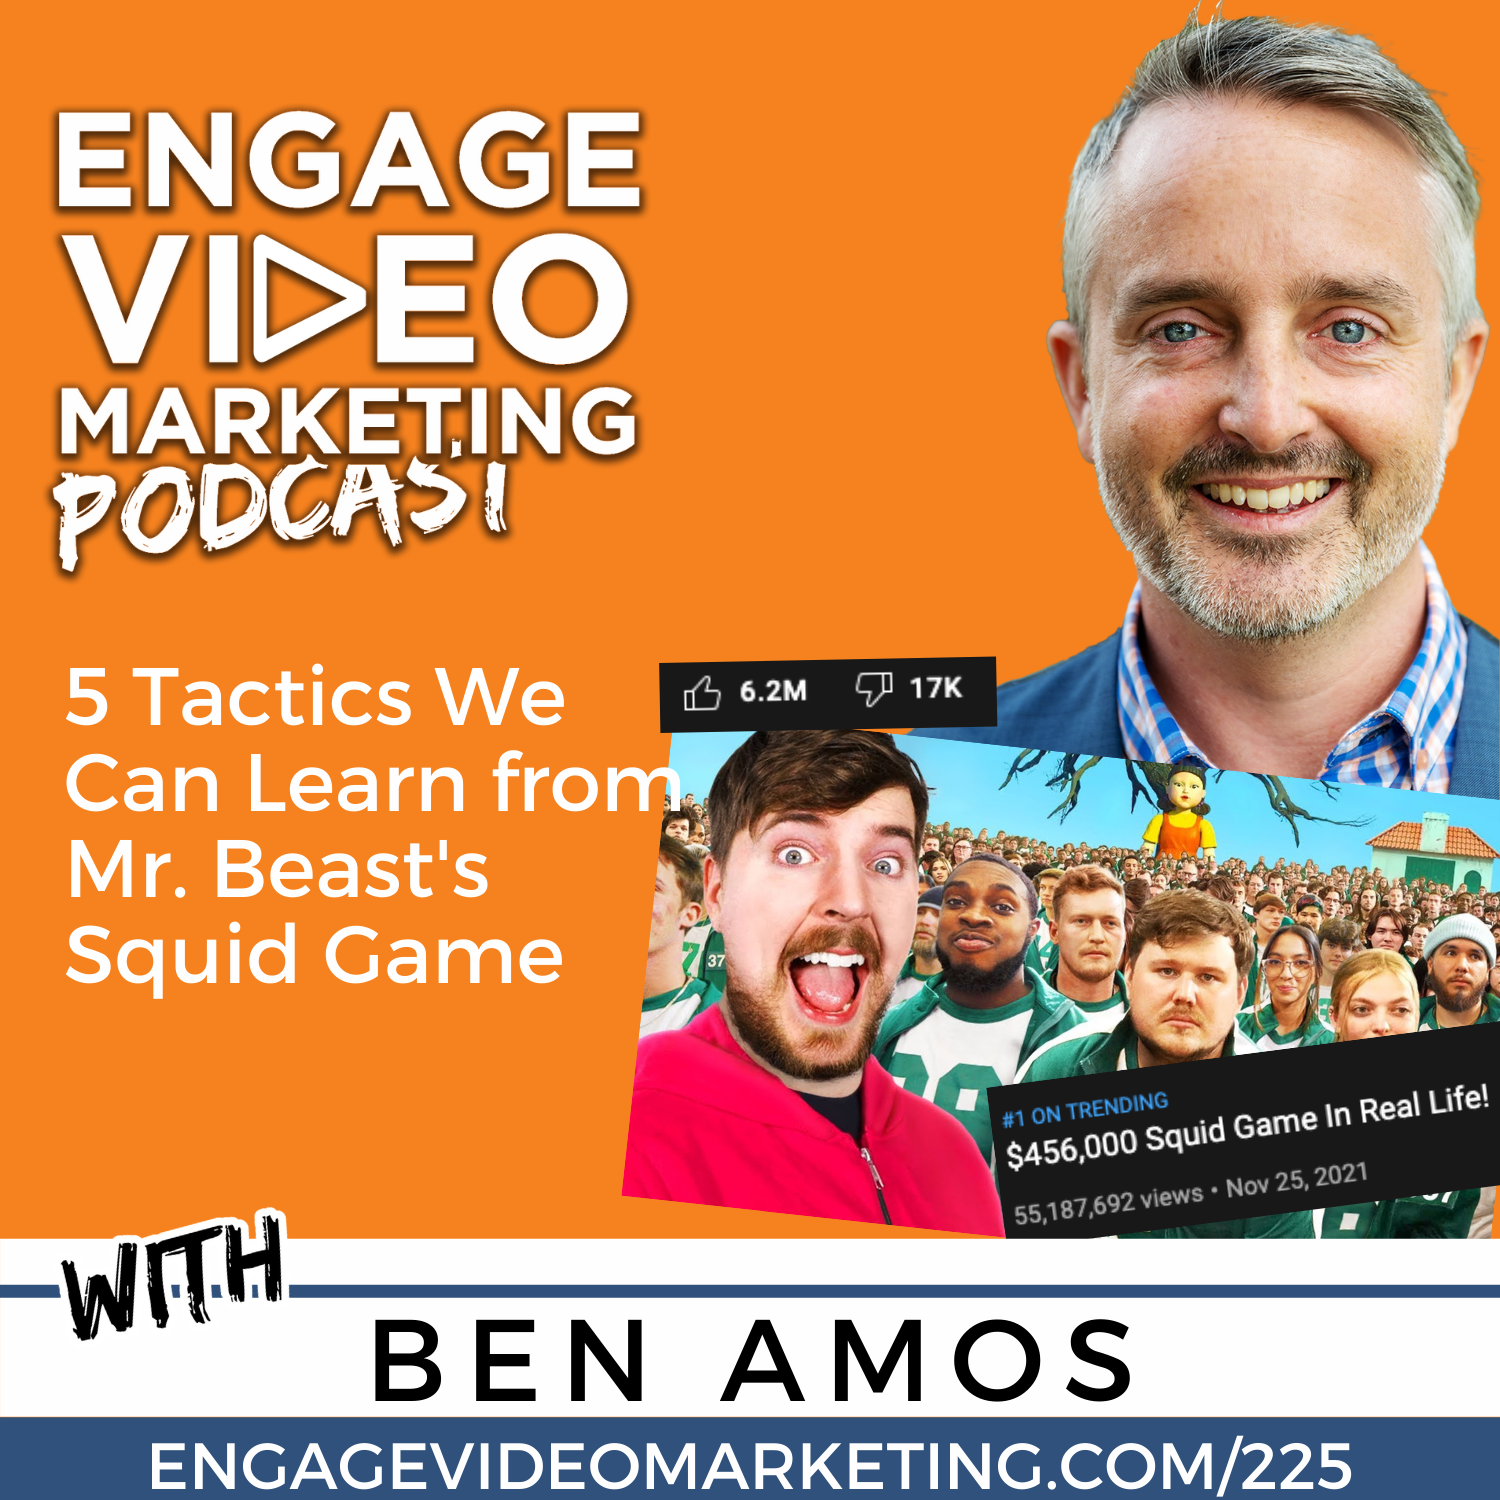 5 Tactics We Can Learn from Mr. Beast’s “Squid Game” with Ben Amos